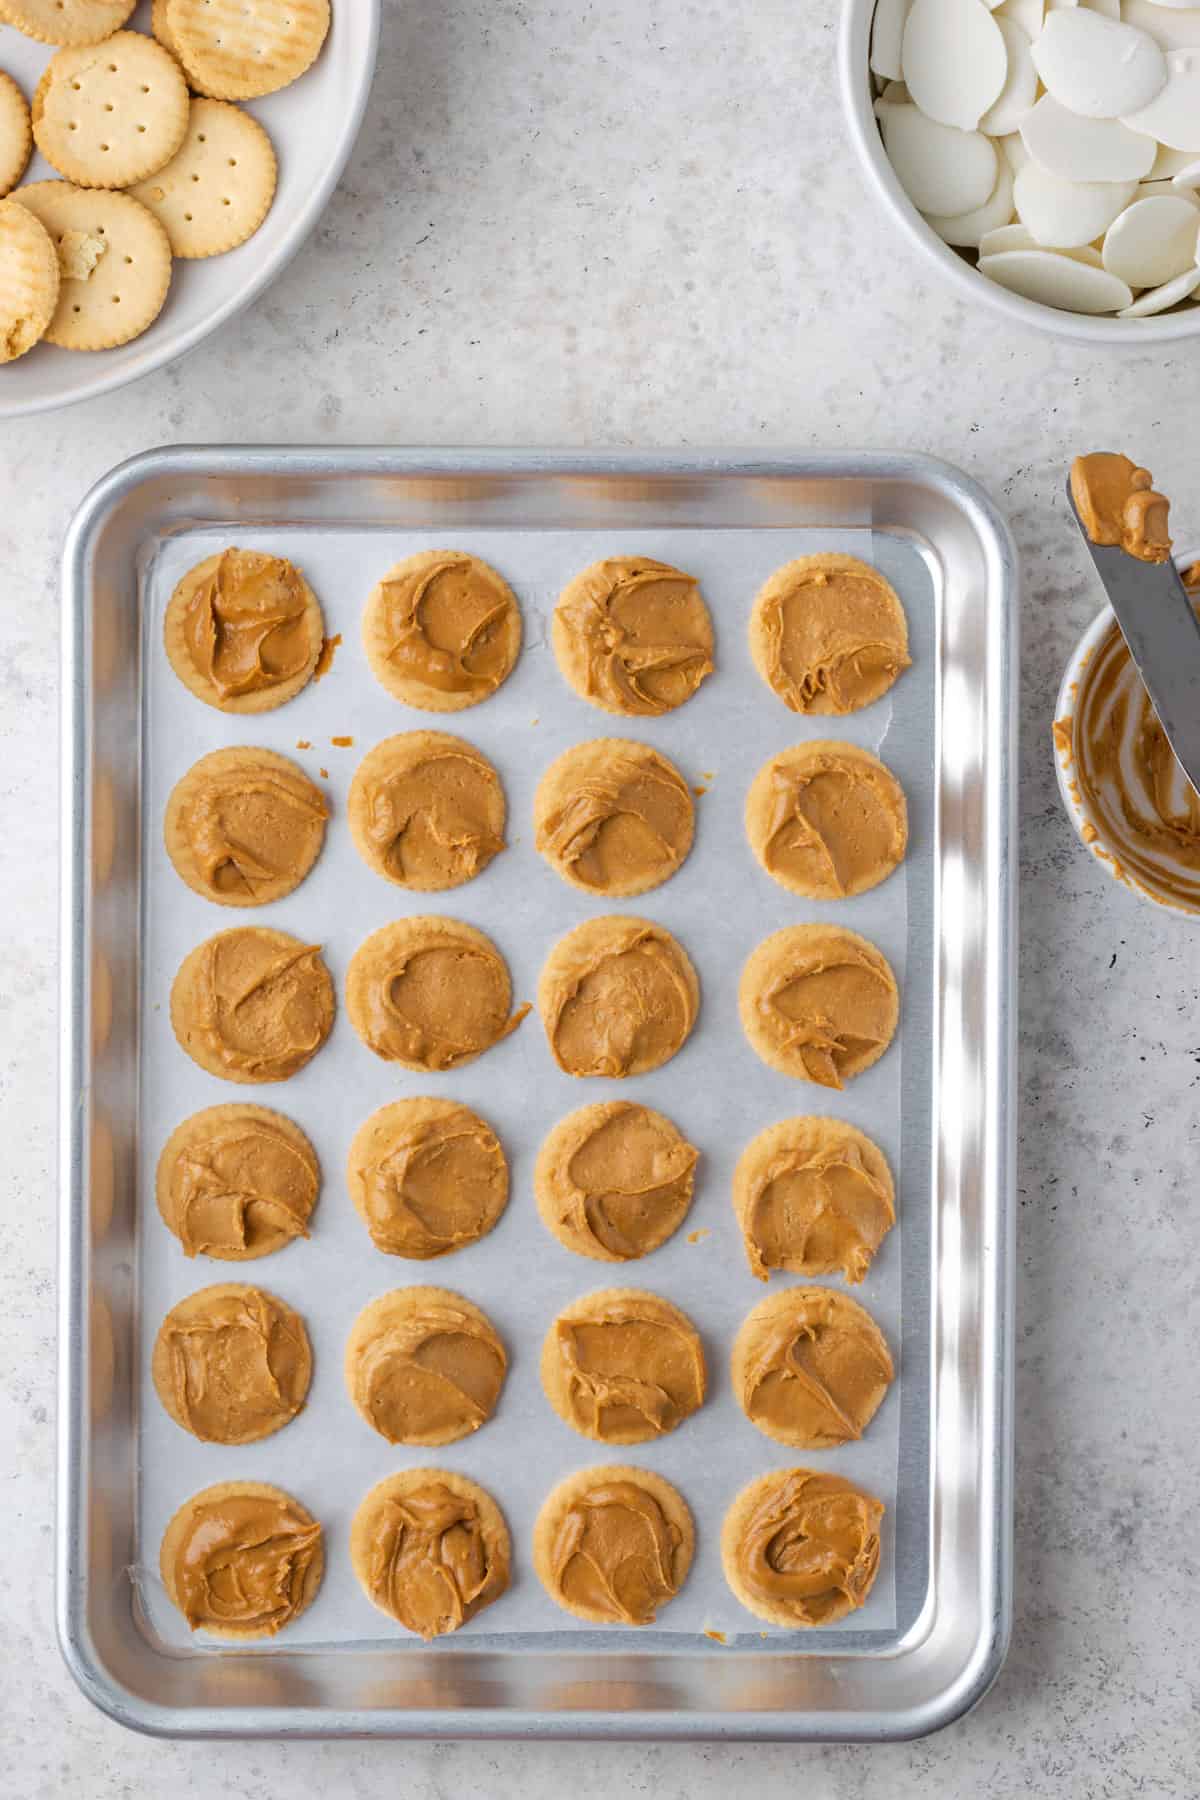 24 Ritz crackers with peanut butter spread on top laying on a baking tray.